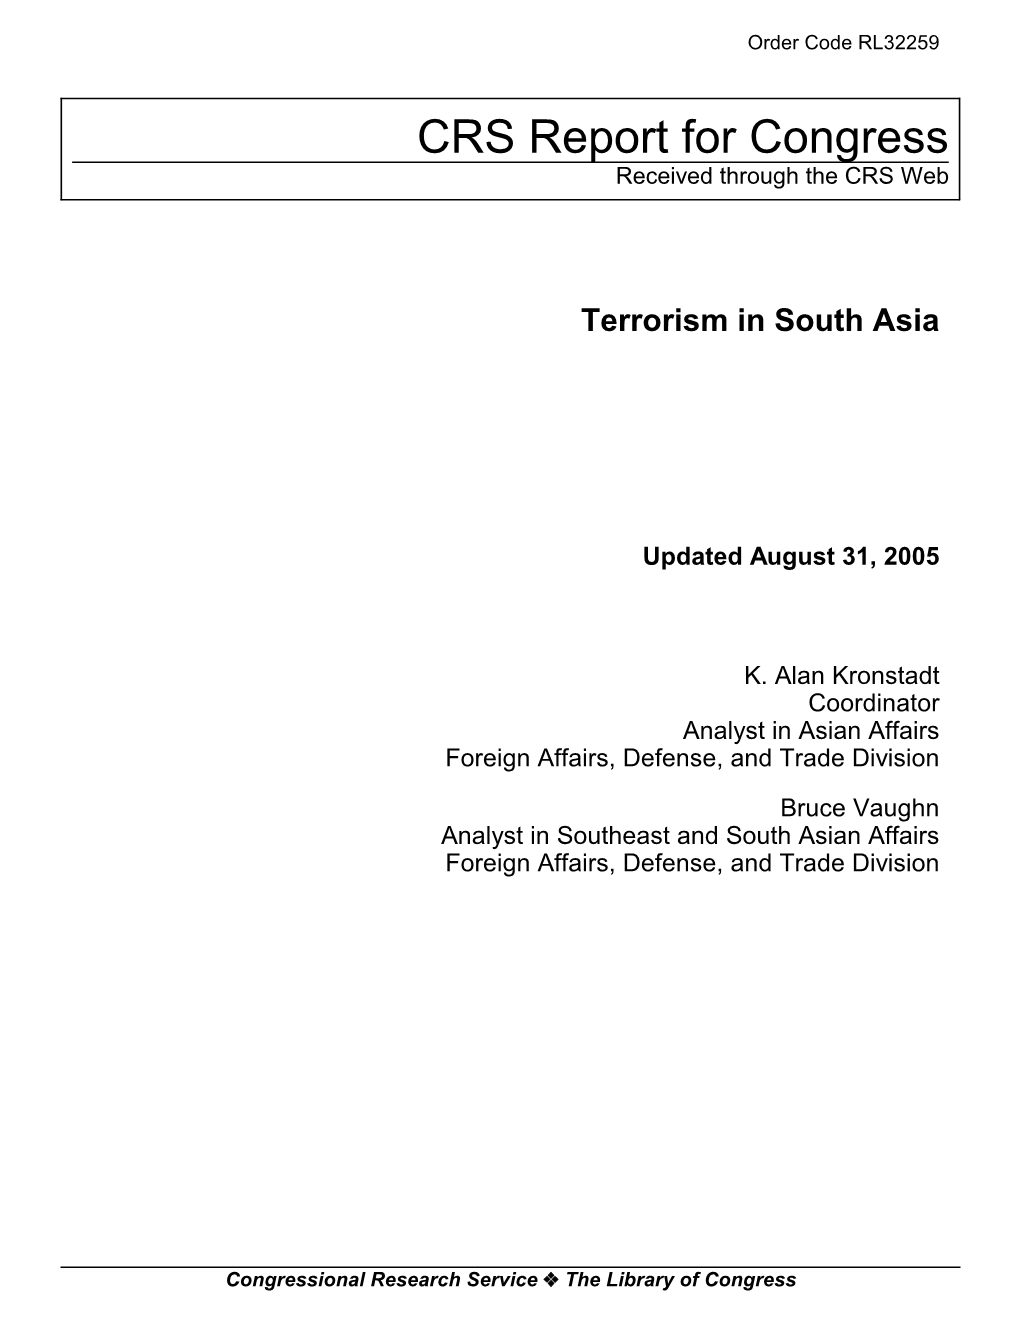 Terrorism in South Asia